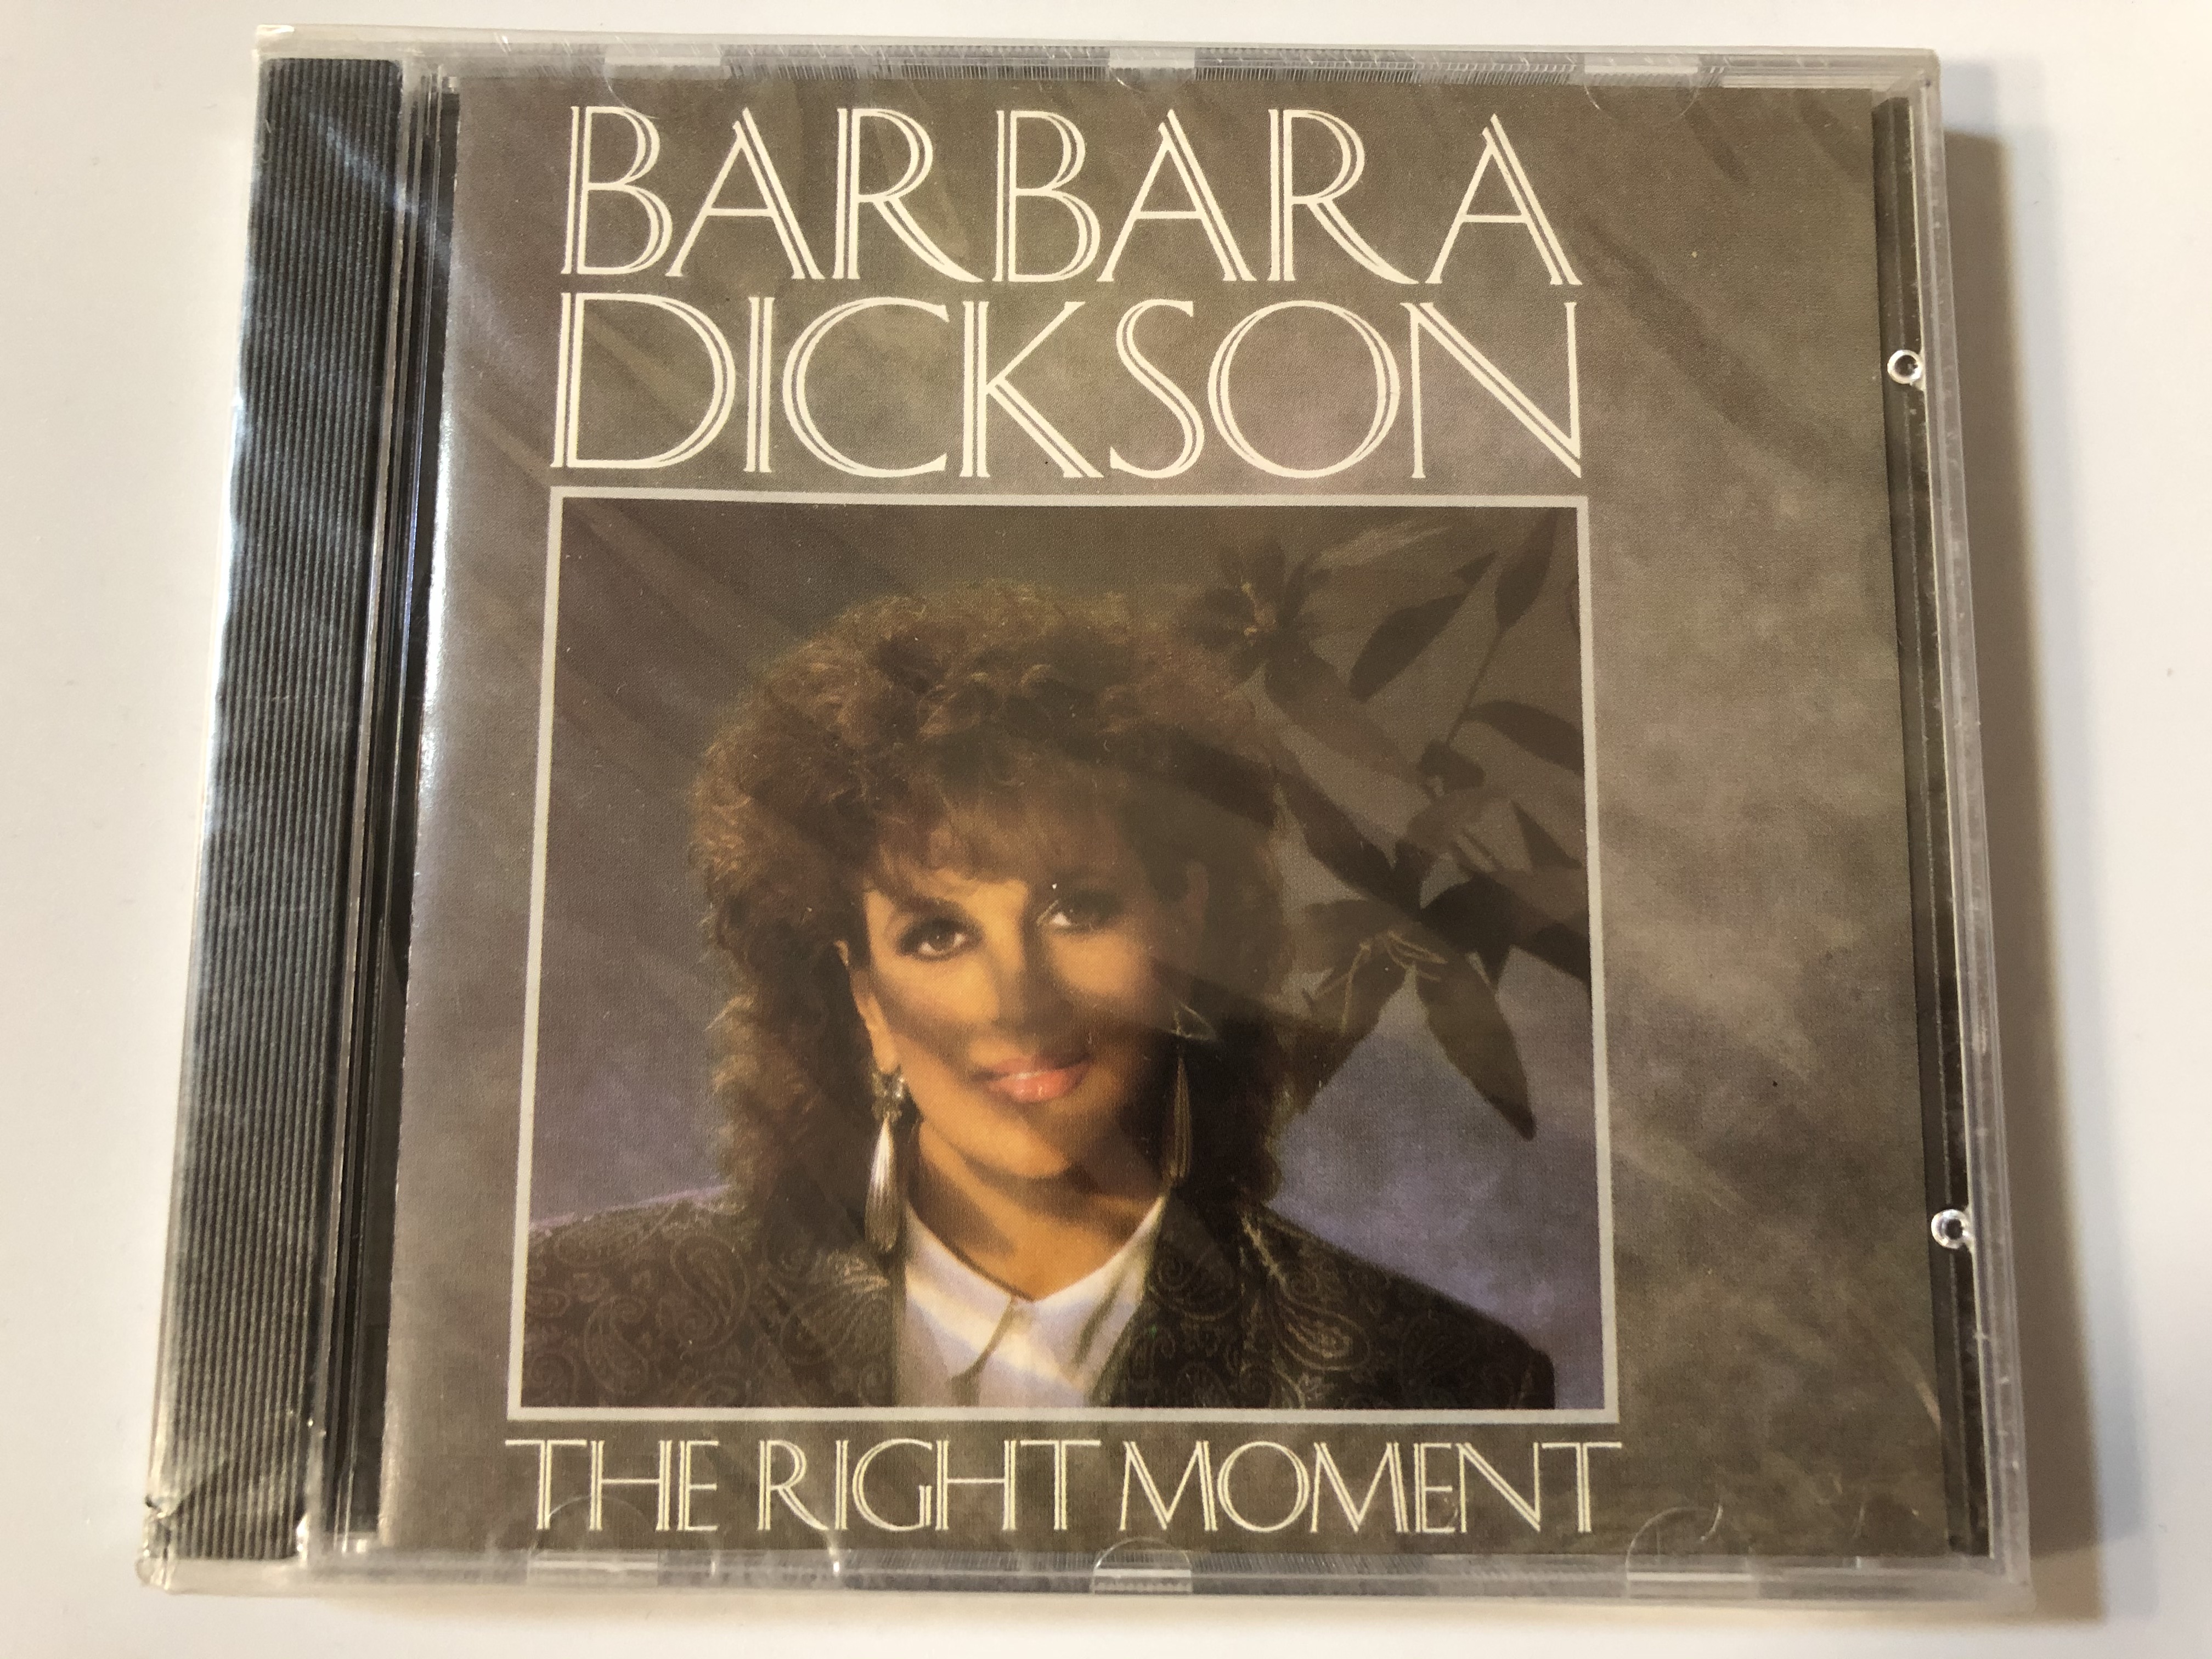 barbara-dickson-the-right-moment-castle-communications-audio-cd-1992-clacd-310-1-.jpg